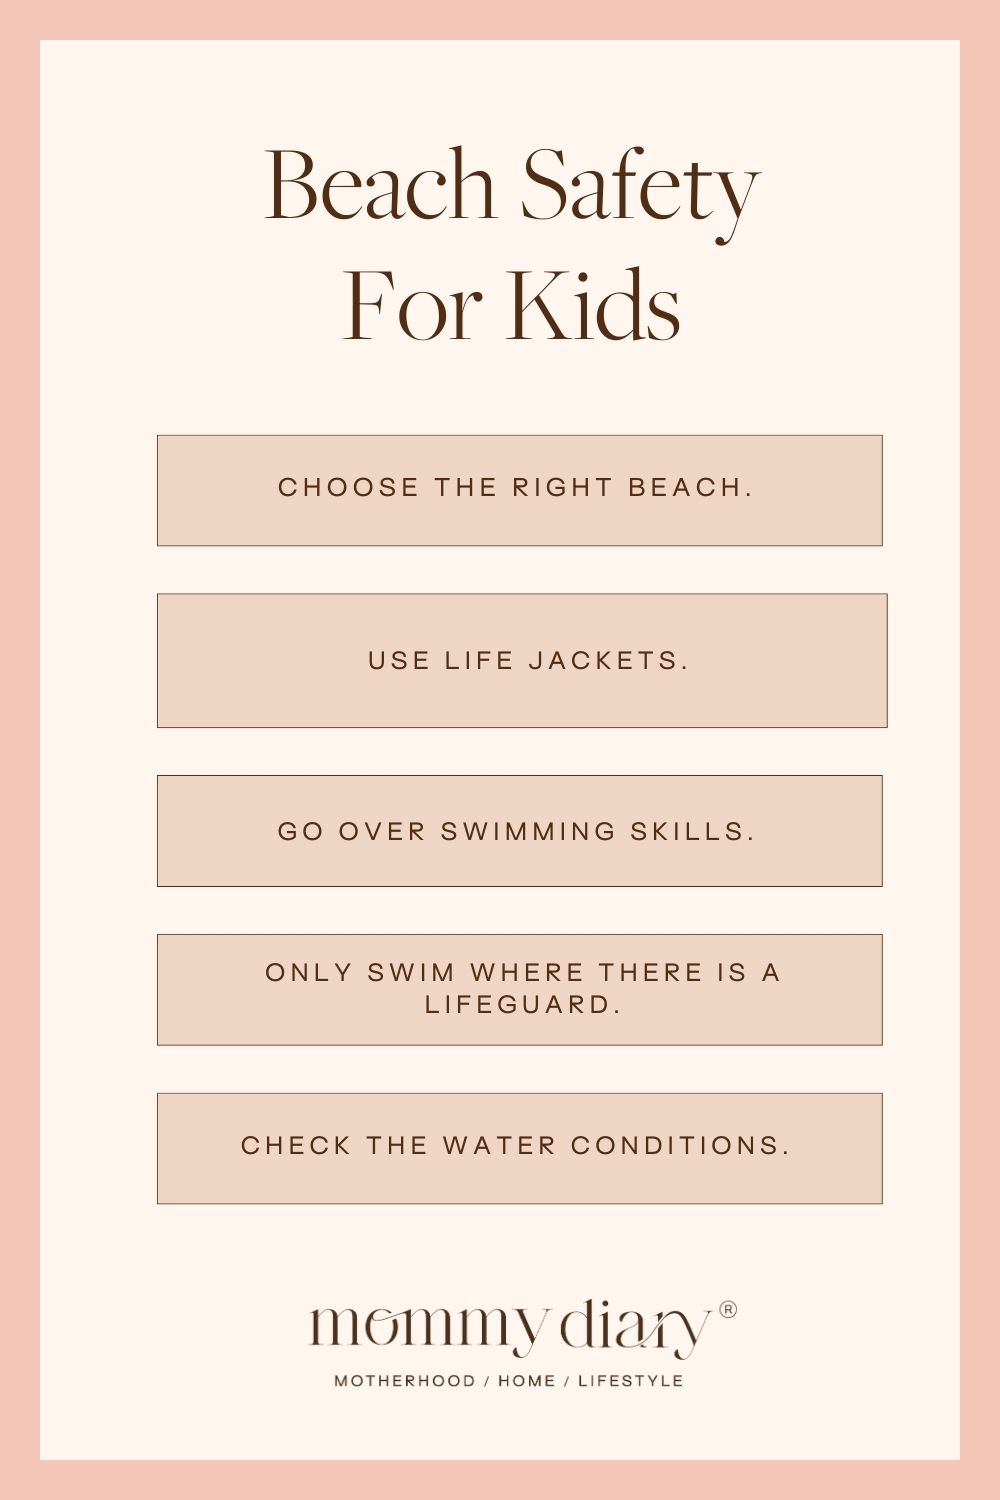 Beach Safety For Kids